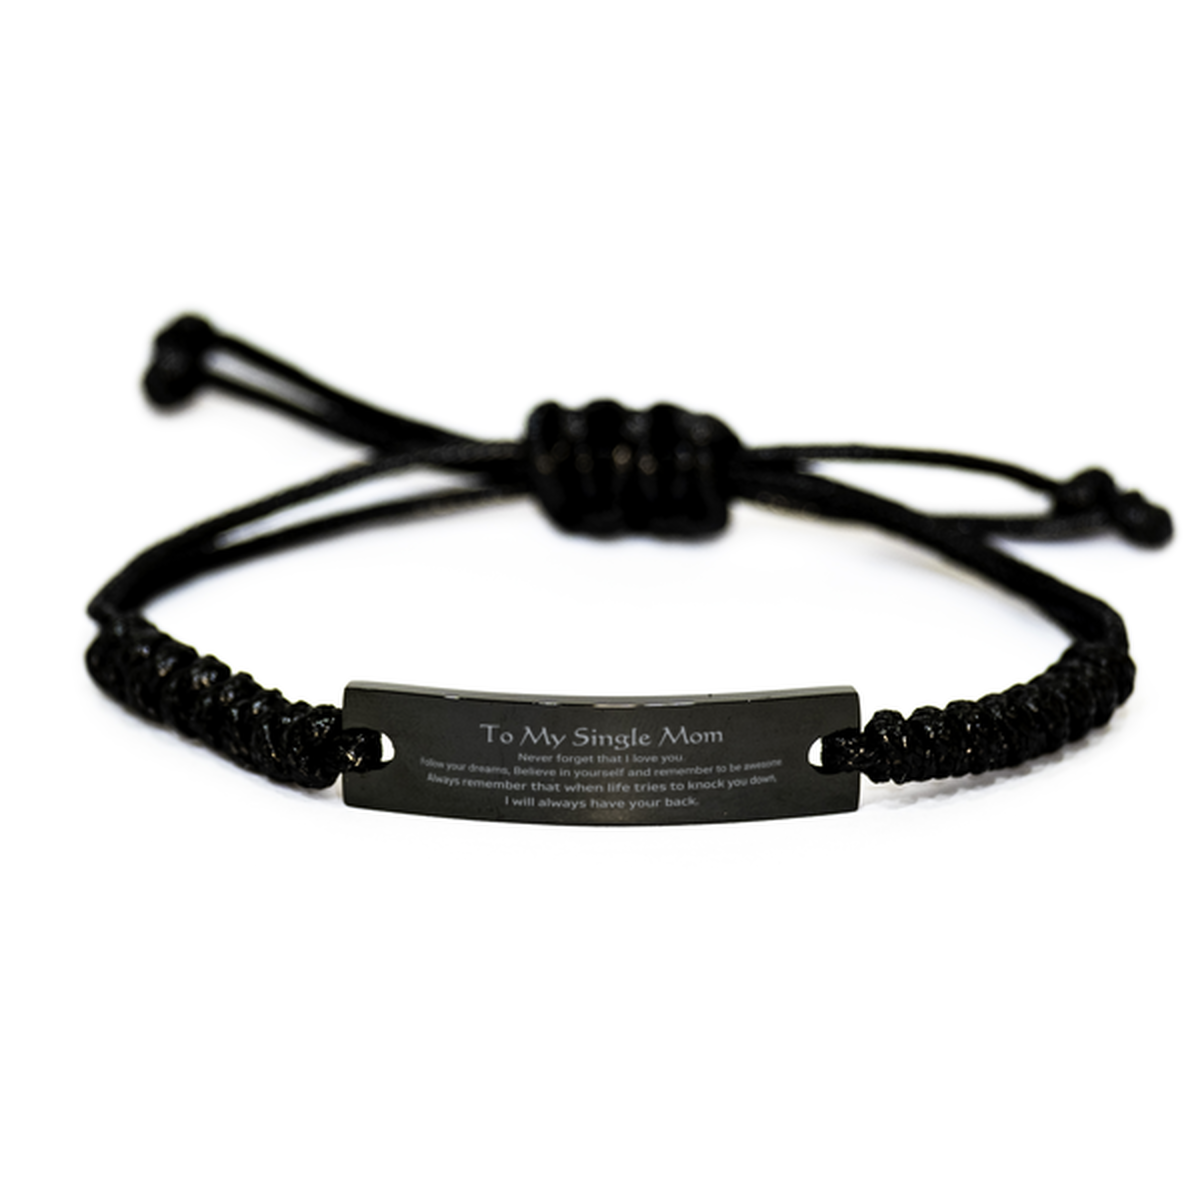 Inspirational Gifts for Single Mom, Follow your dreams, Believe in yourself, Single Mom Black Rope Bracelet, Birthday Christmas Unique Gifts For Single Mom